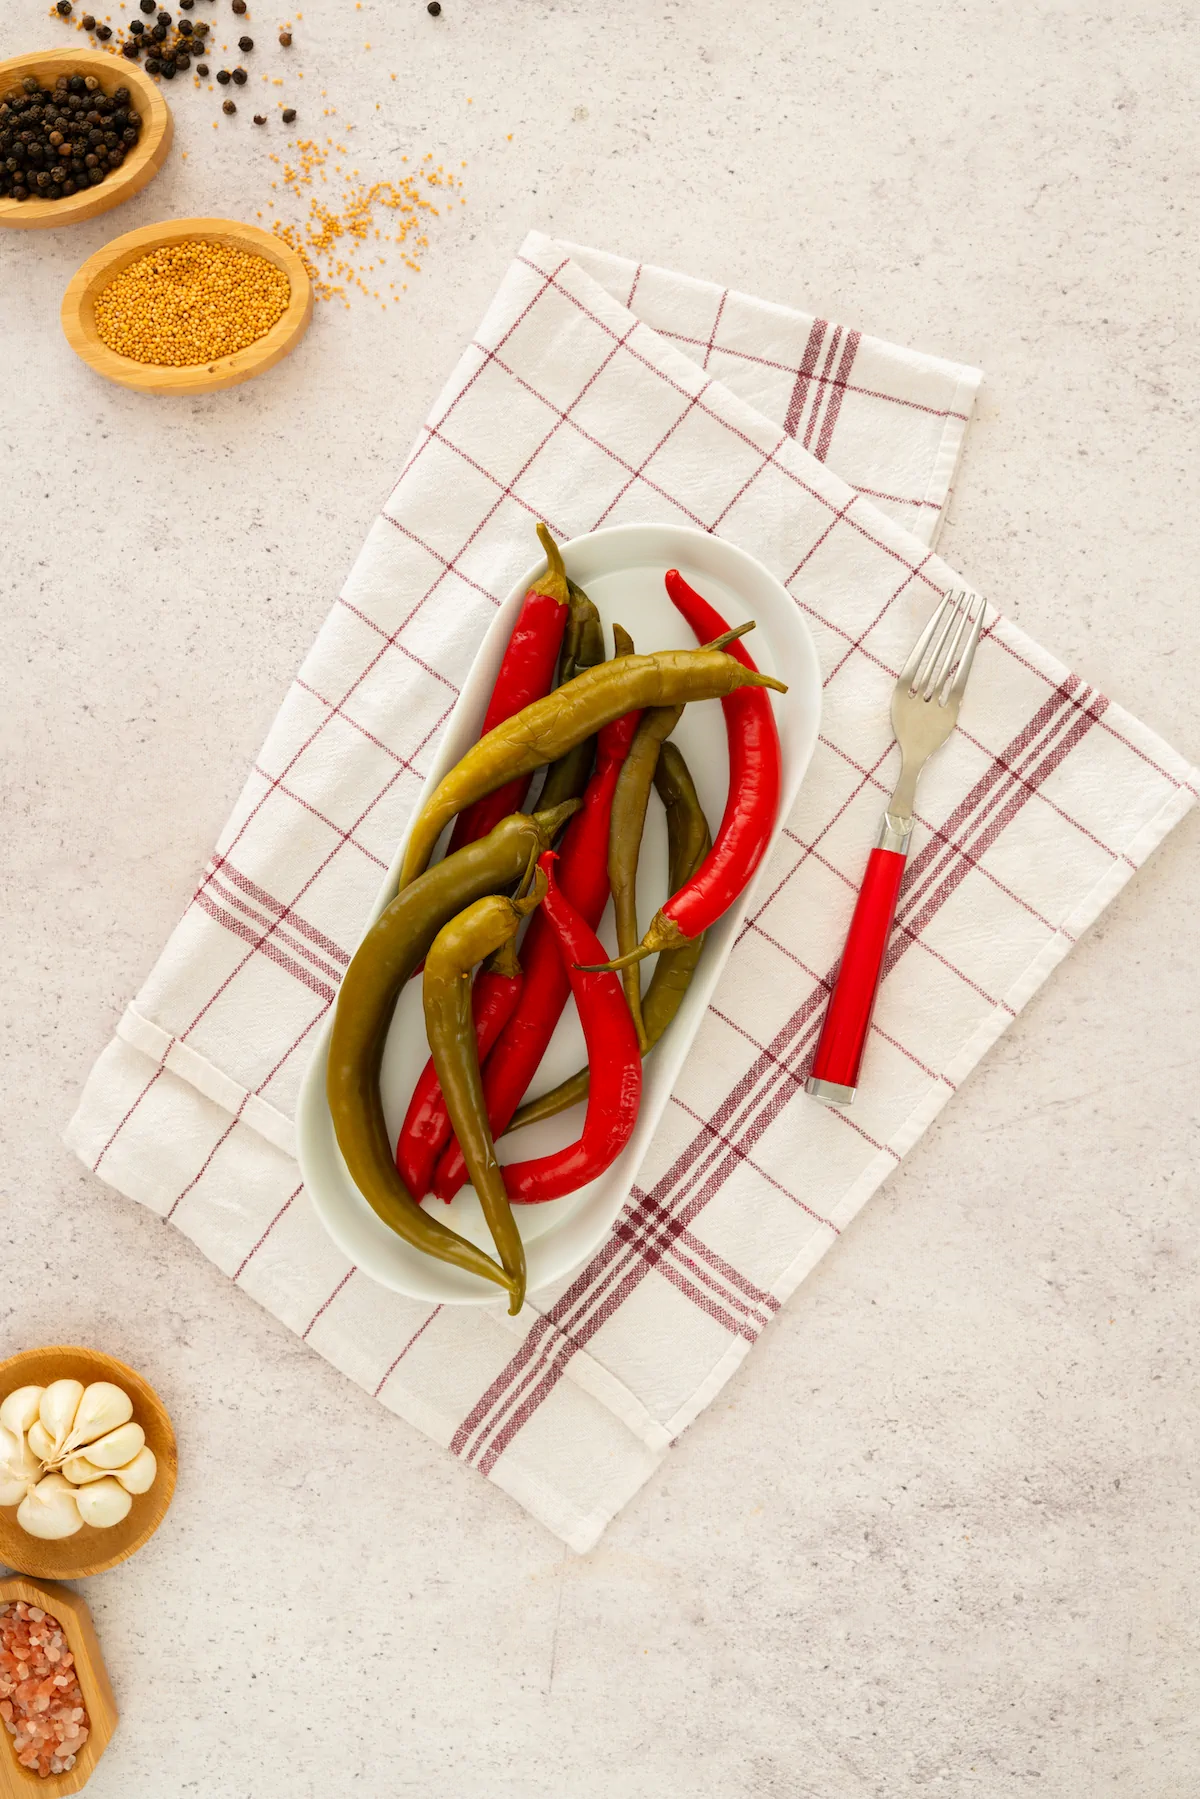 Homemade pickled peppers on a plate, accompanied by a fork.